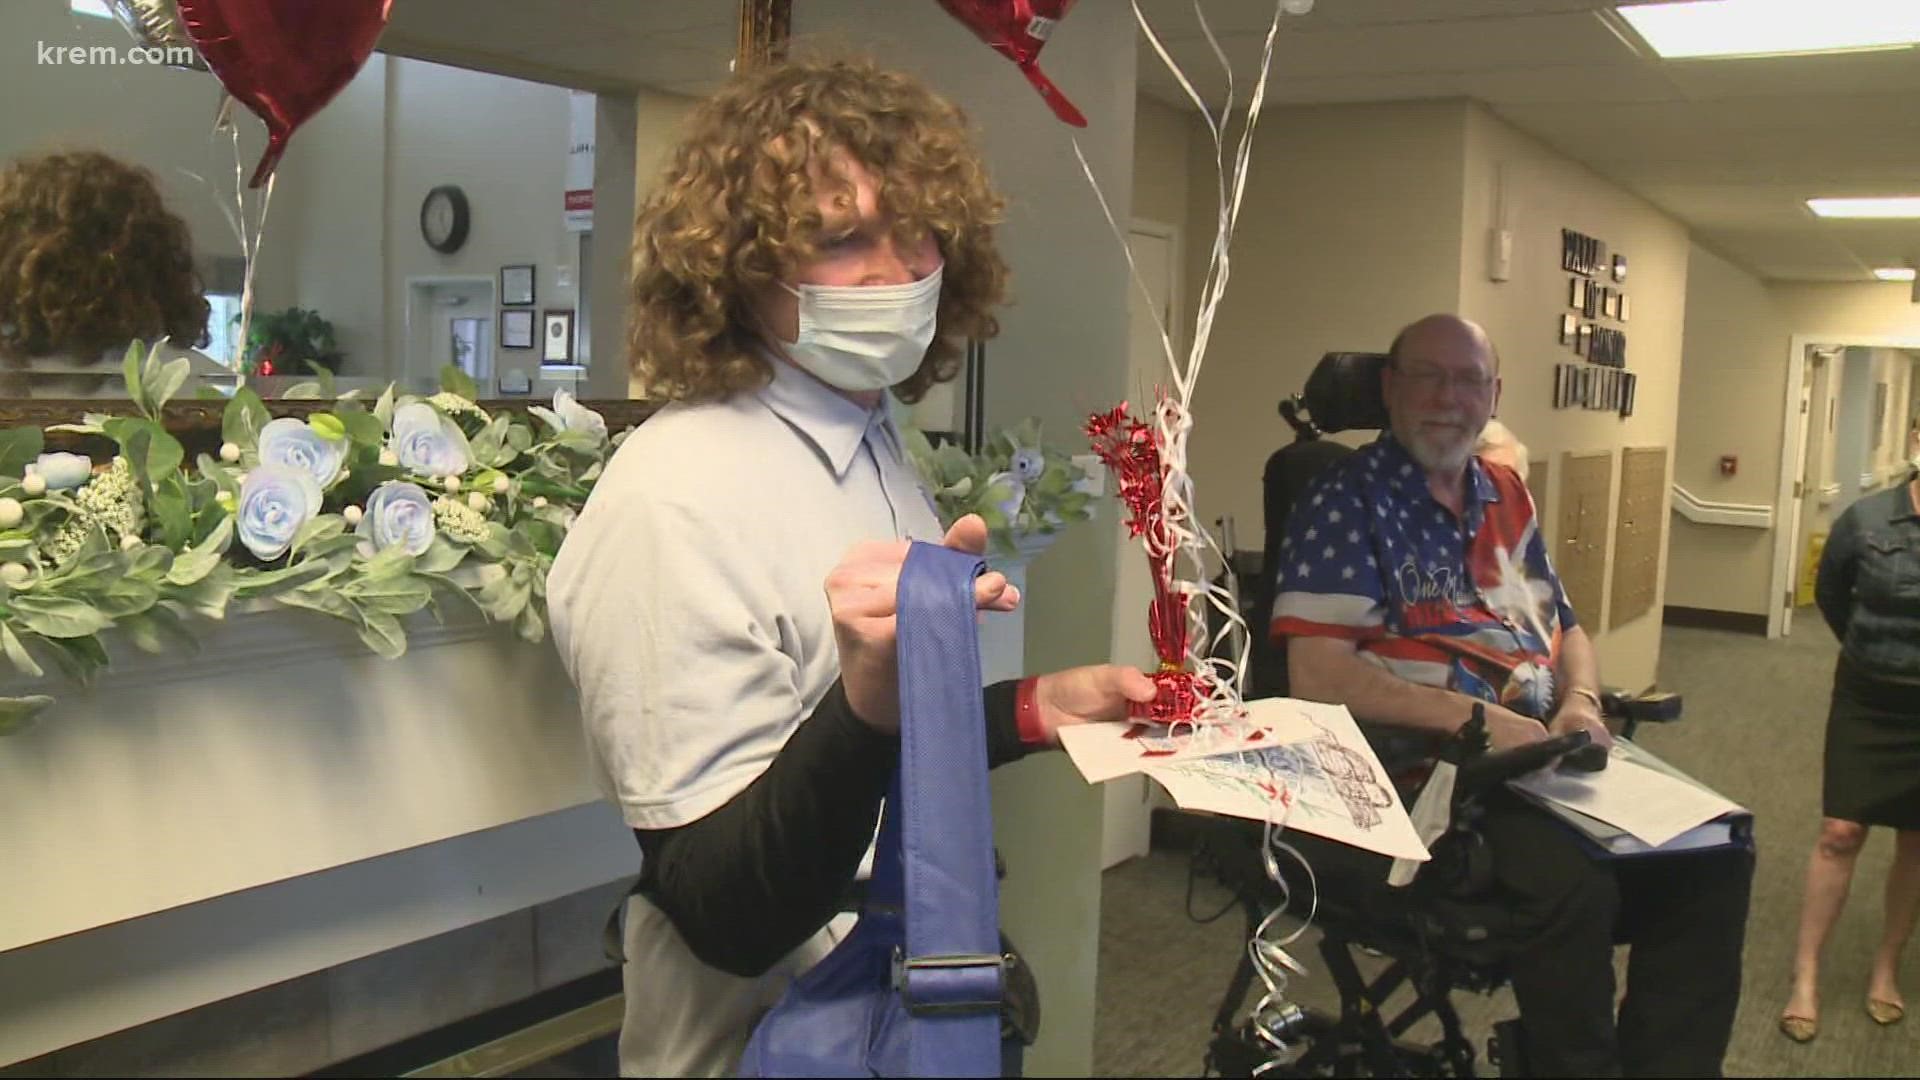 Residents at Avamere on the South Hill greeted their loyal mail carrier, Koby, with cheers and gifts for bringing them mail throughout the pandemic.